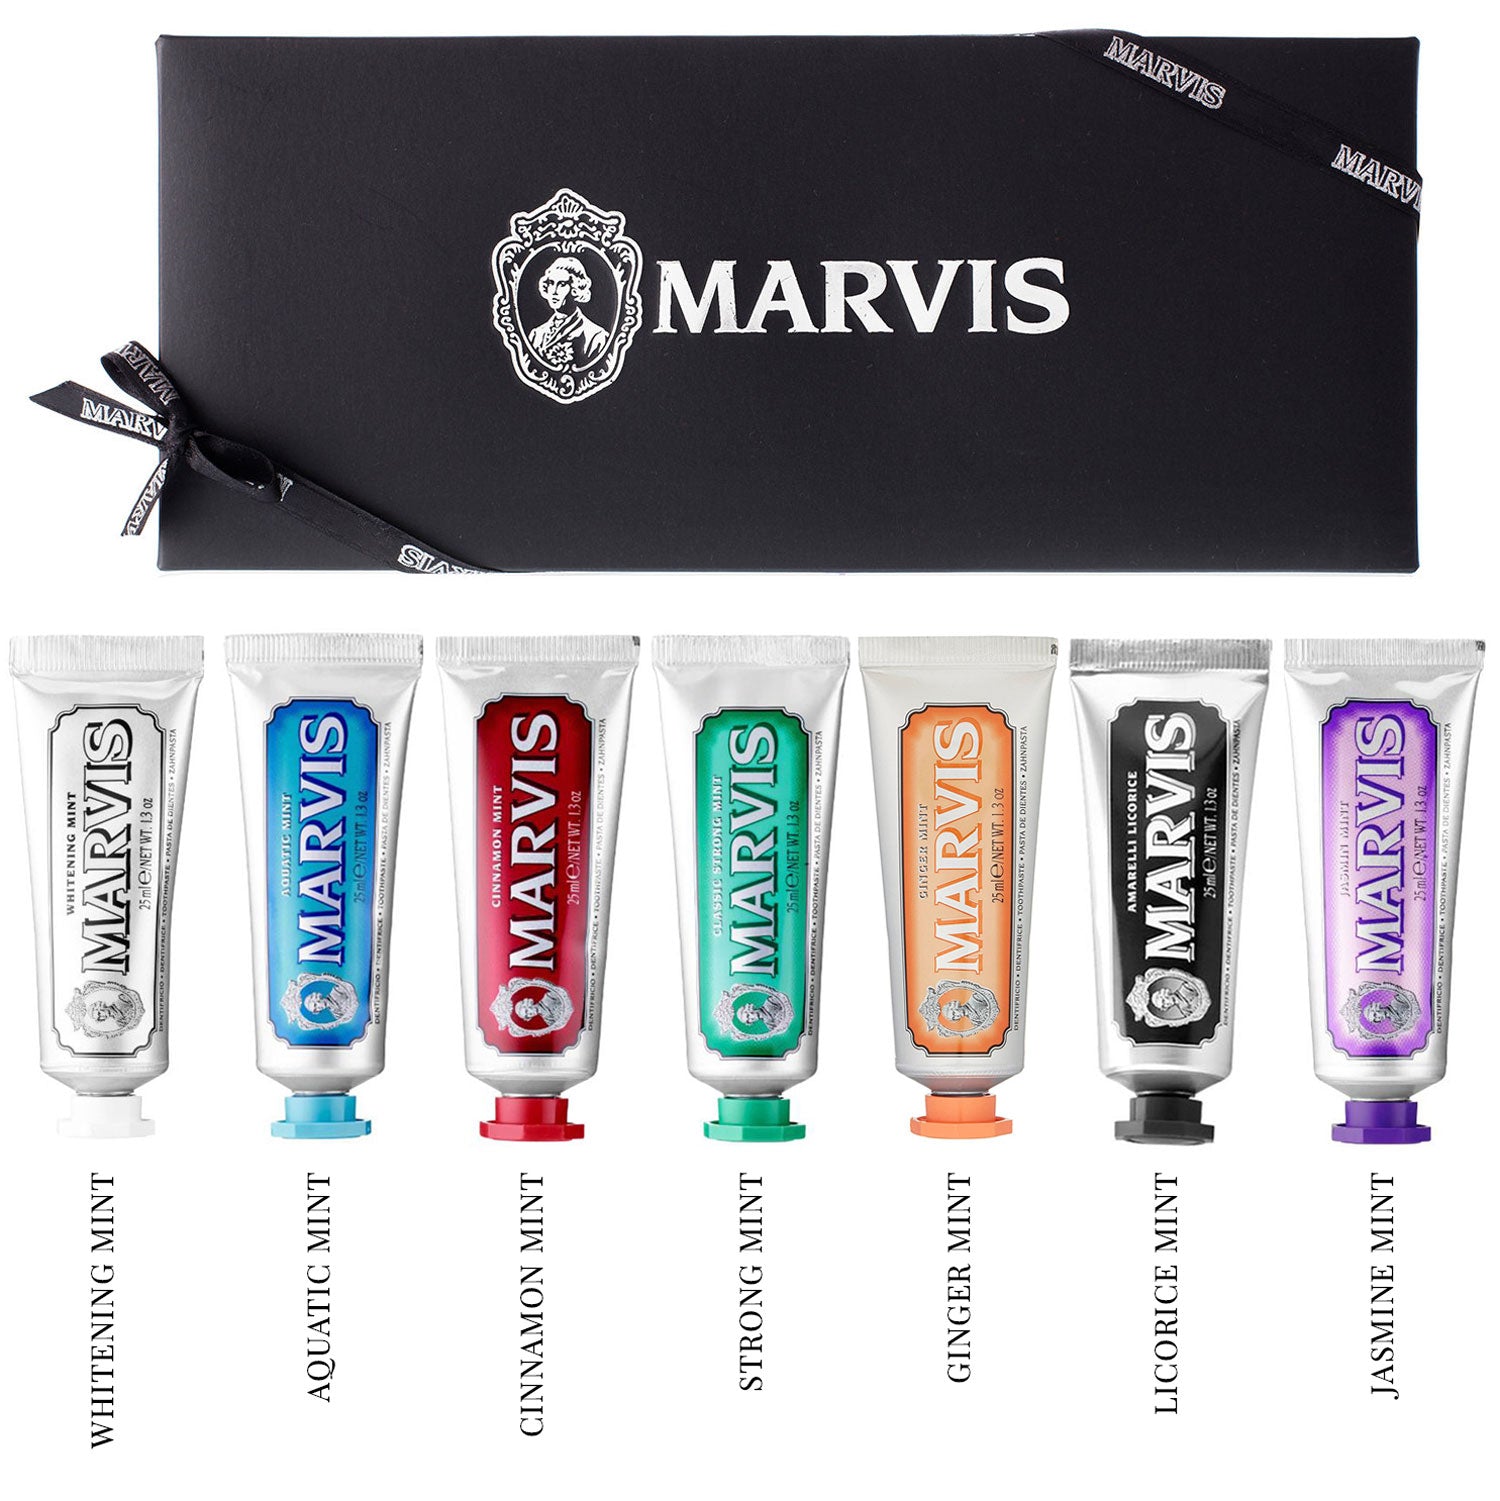 Marvis Toothpaste Collection Black Box Gift Set - Orcadia